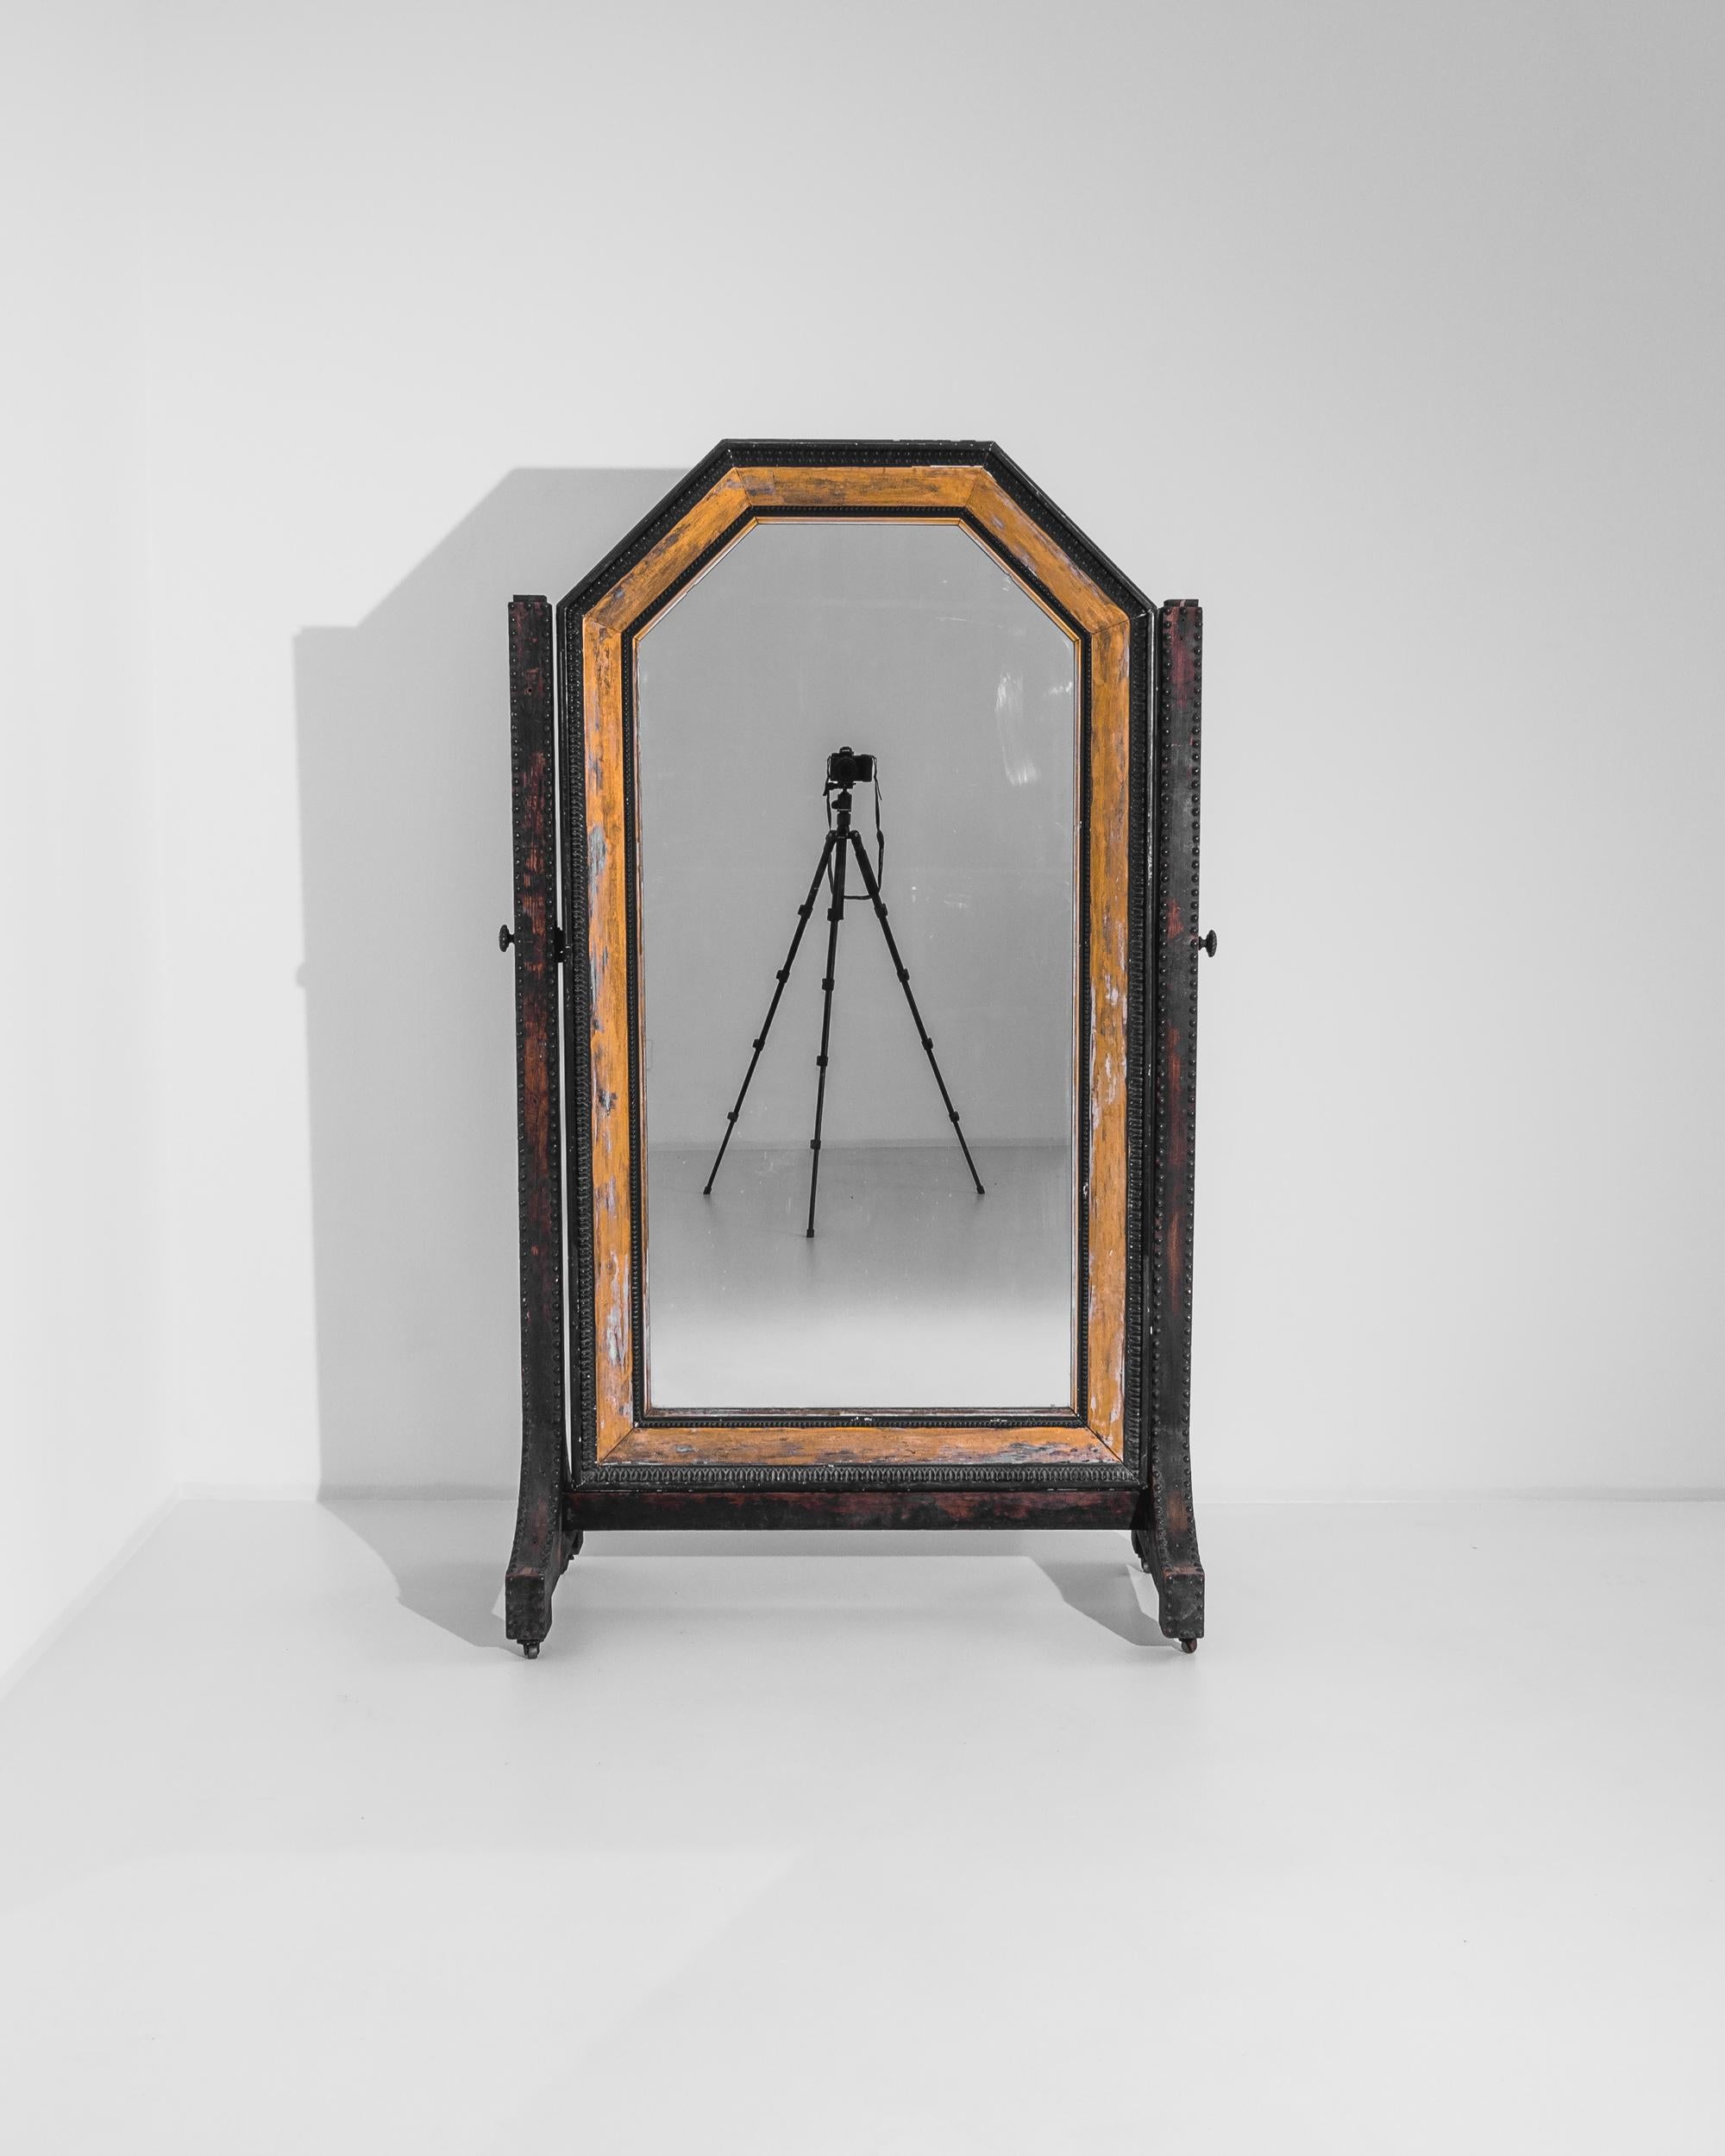 A large 1920s French wooden mirror on wheels. Flanked by two mulberry colored legs, this full length floor mirror offers a graceful reflection. Its combination of natural wood hue, black leaf pattern, and dark umber form a lively, yet contemplative